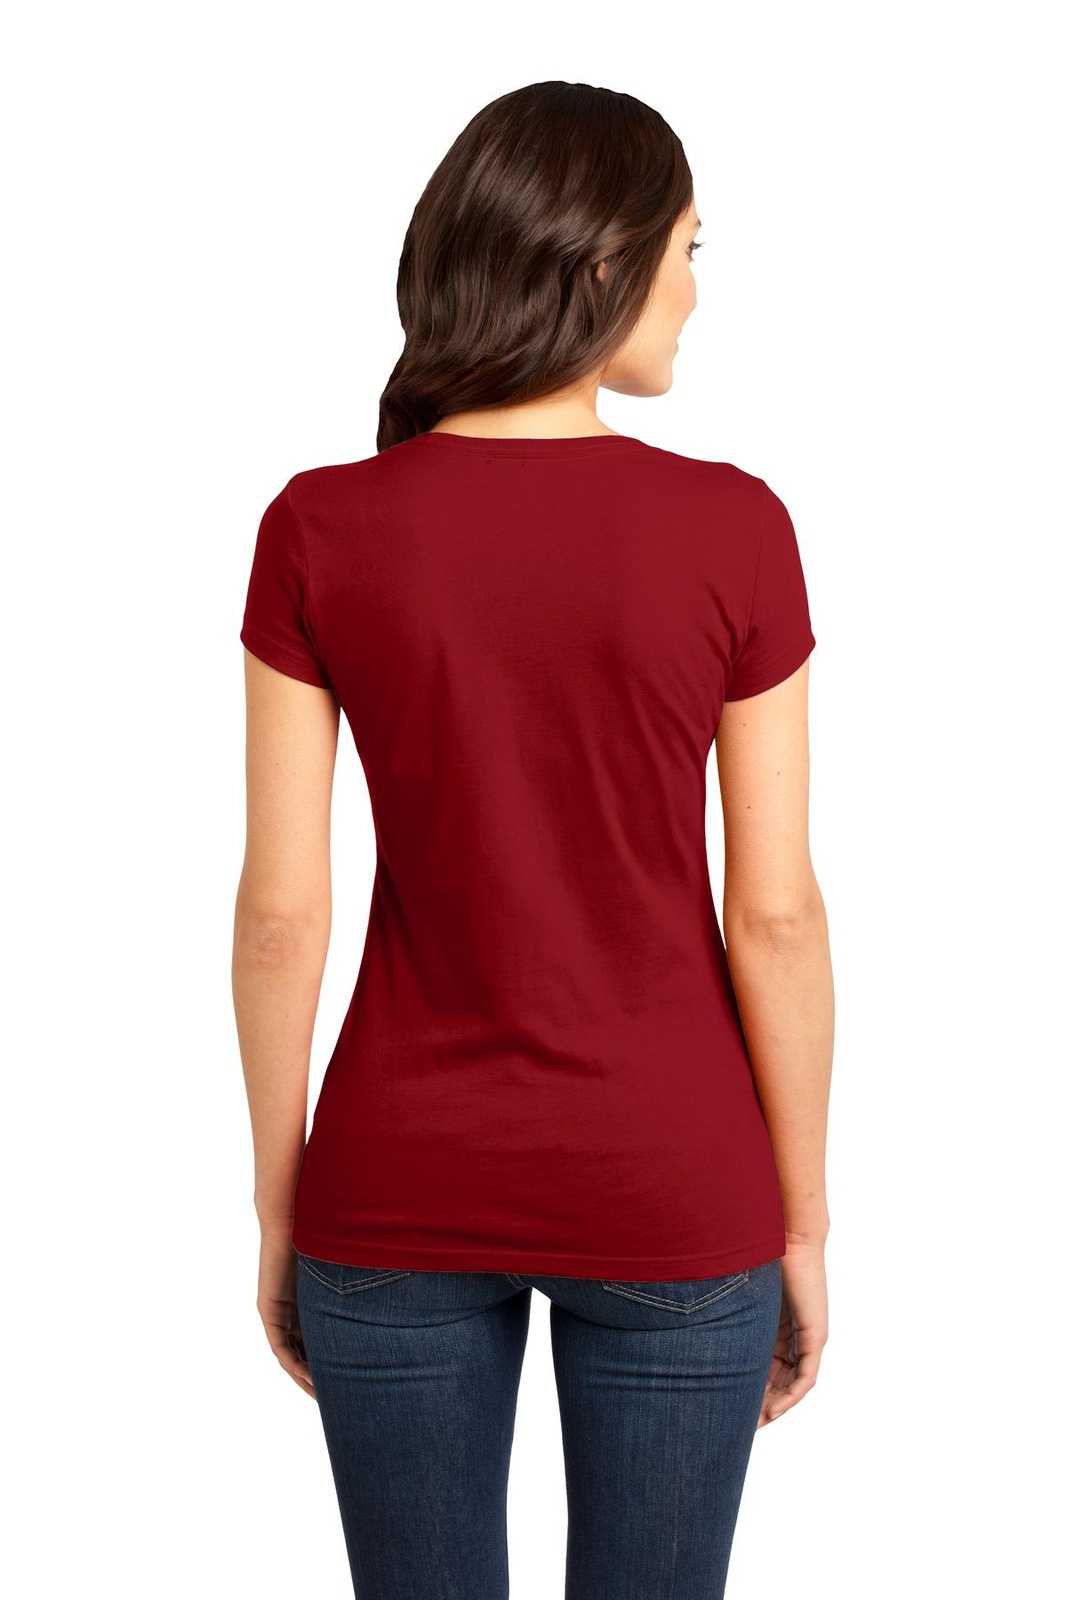 District DT6001 Women's Fitted Very Important Tee - Classic Red - HIT a Double - 1